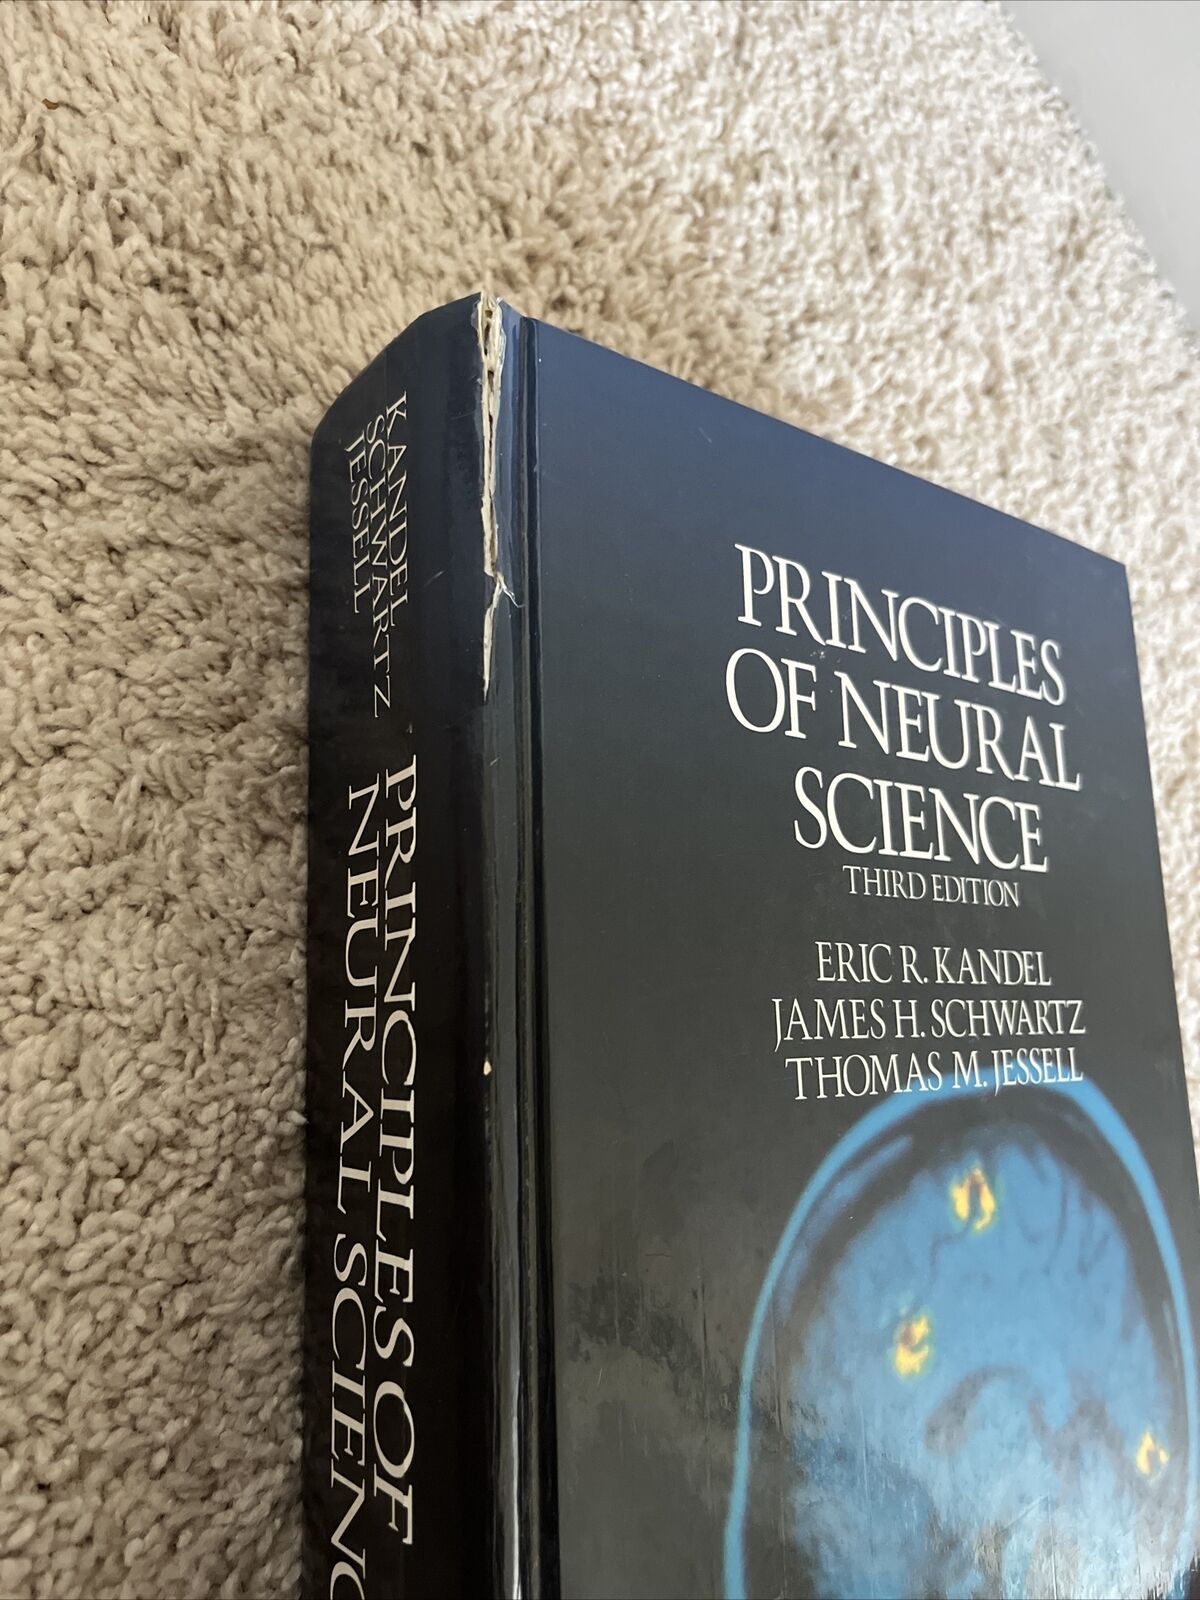 Principles of Neural Science by James H. Schwartz (1991, Hardcover